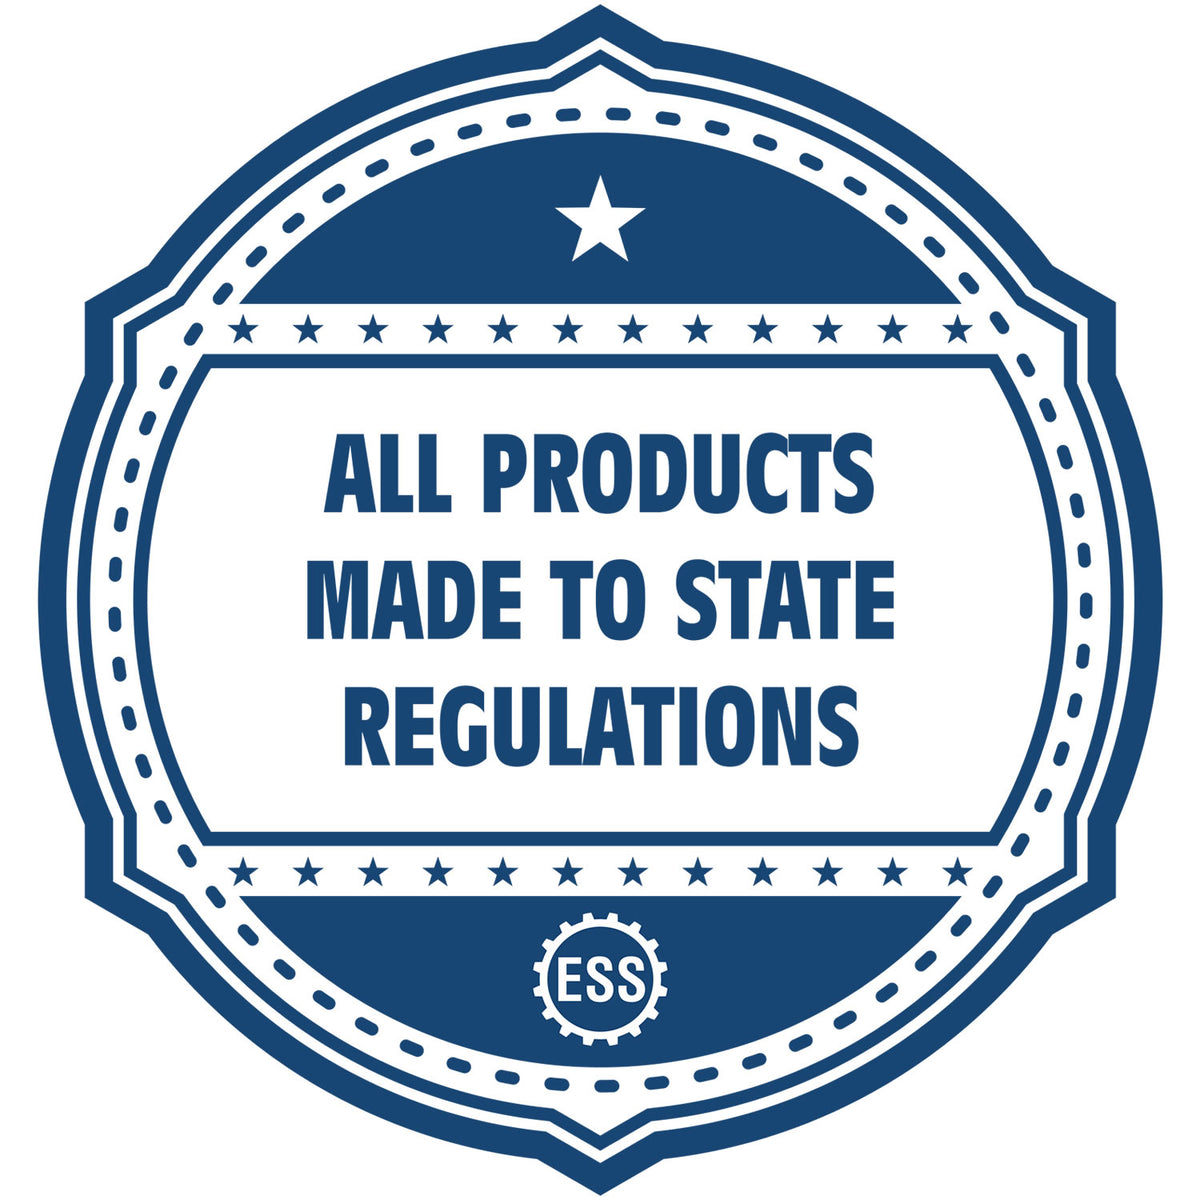 An icon or badge element for the Georgia Engineer Desk Seal showing that this product is made in compliance with state regulations.